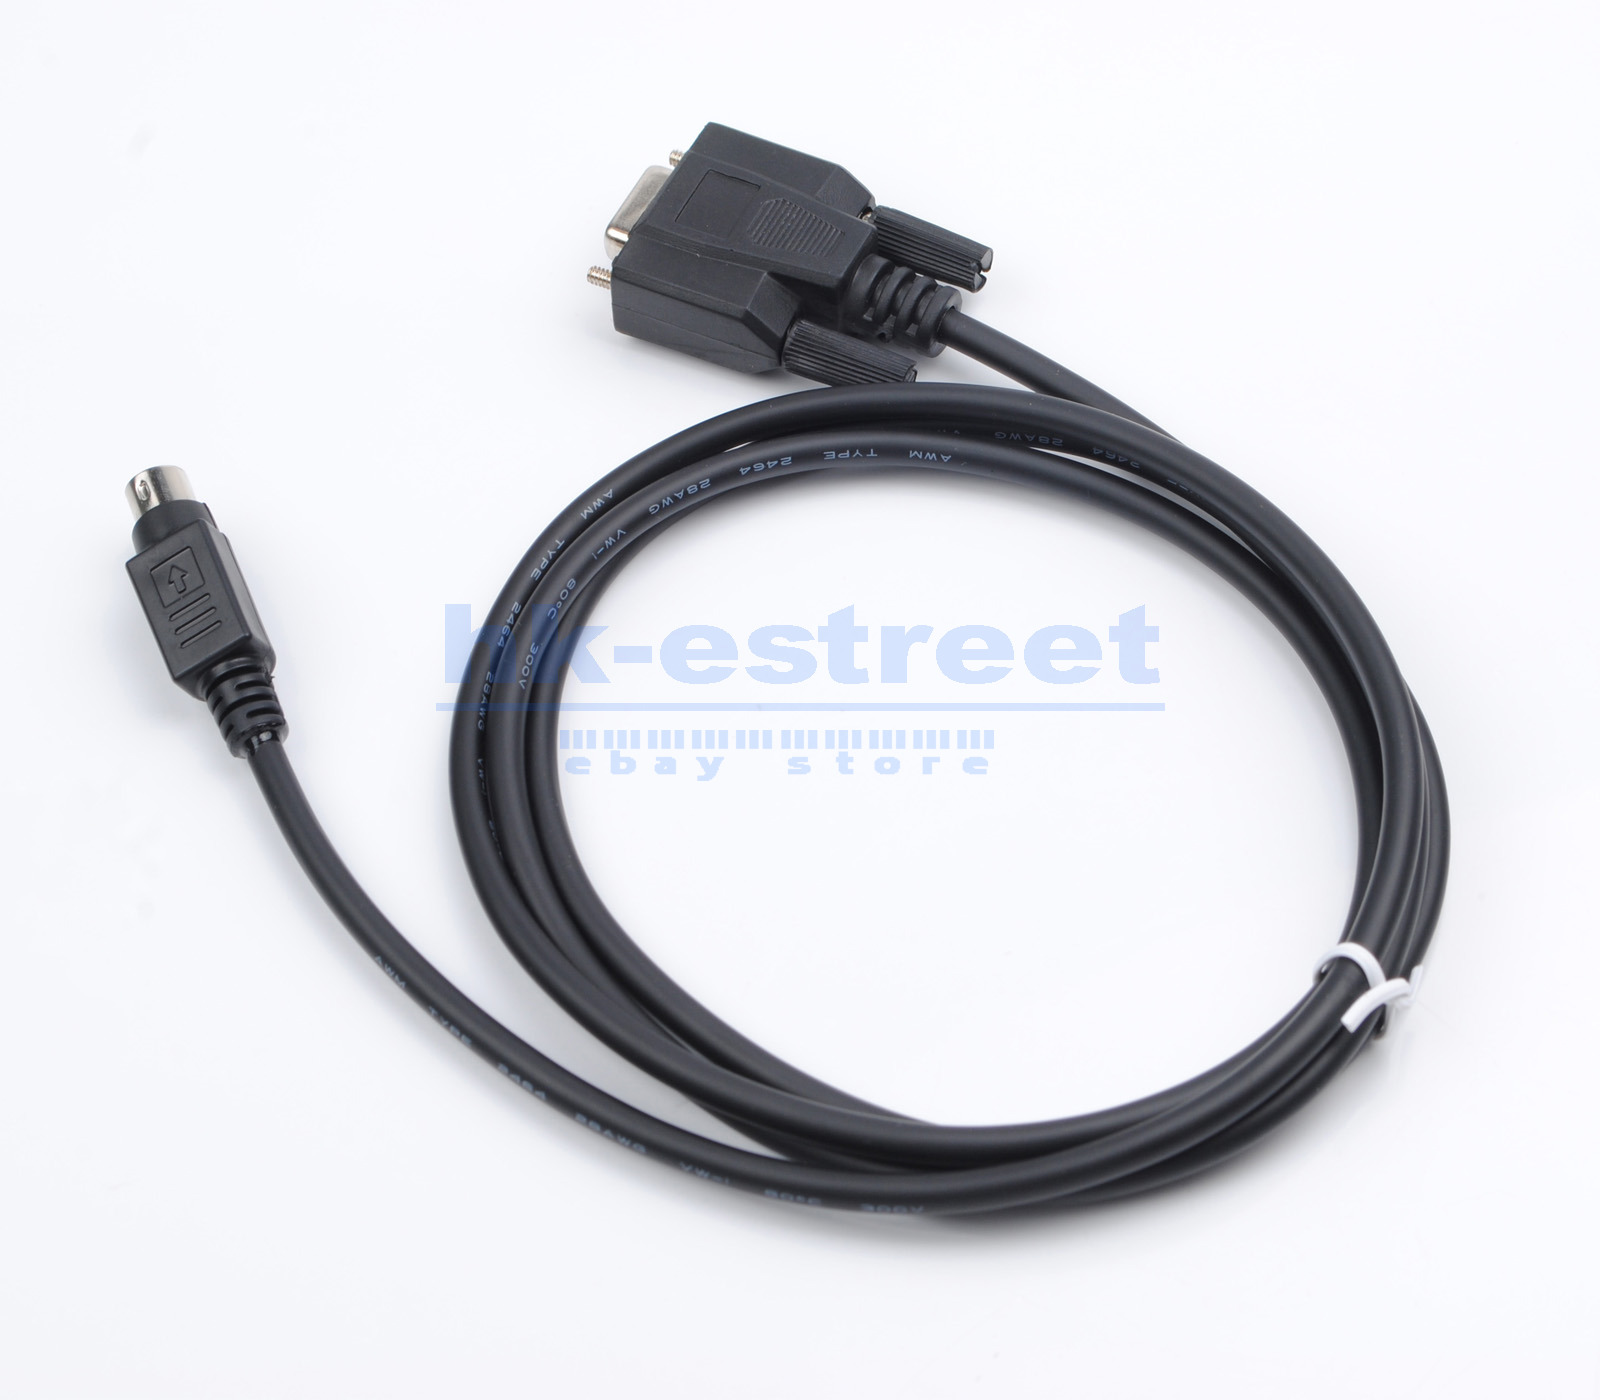 New Fit for Dell Password Reset/Service Cable MN657 MD1200 MD3200 US Shipping